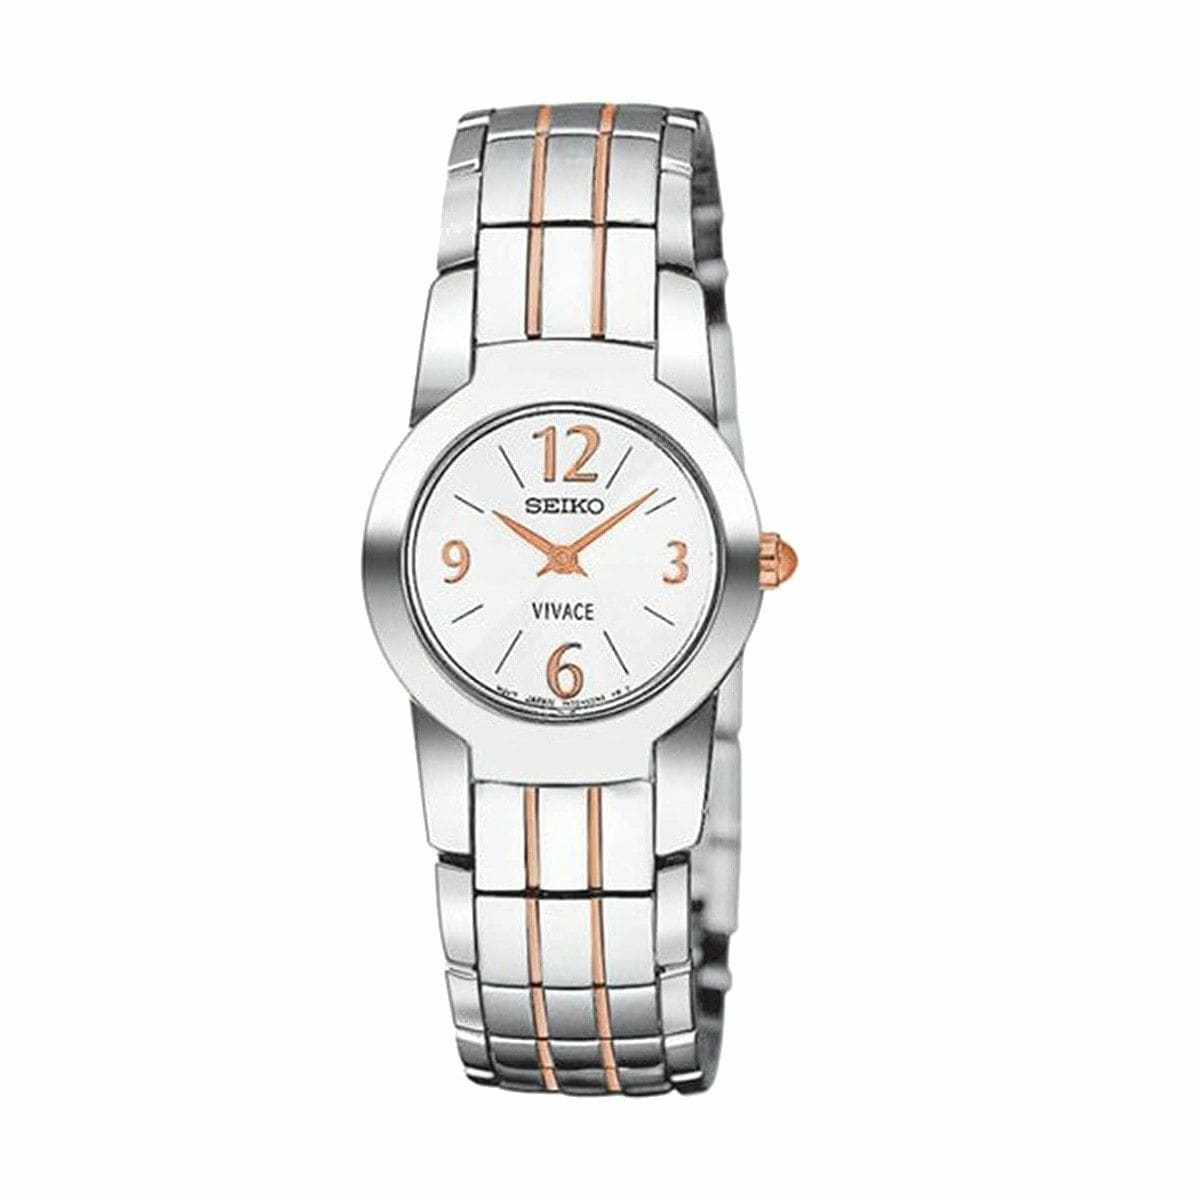 Seiko SUJ279 Vivace Two Tone Stainless Steel White Dial Women's Watch 029665122926